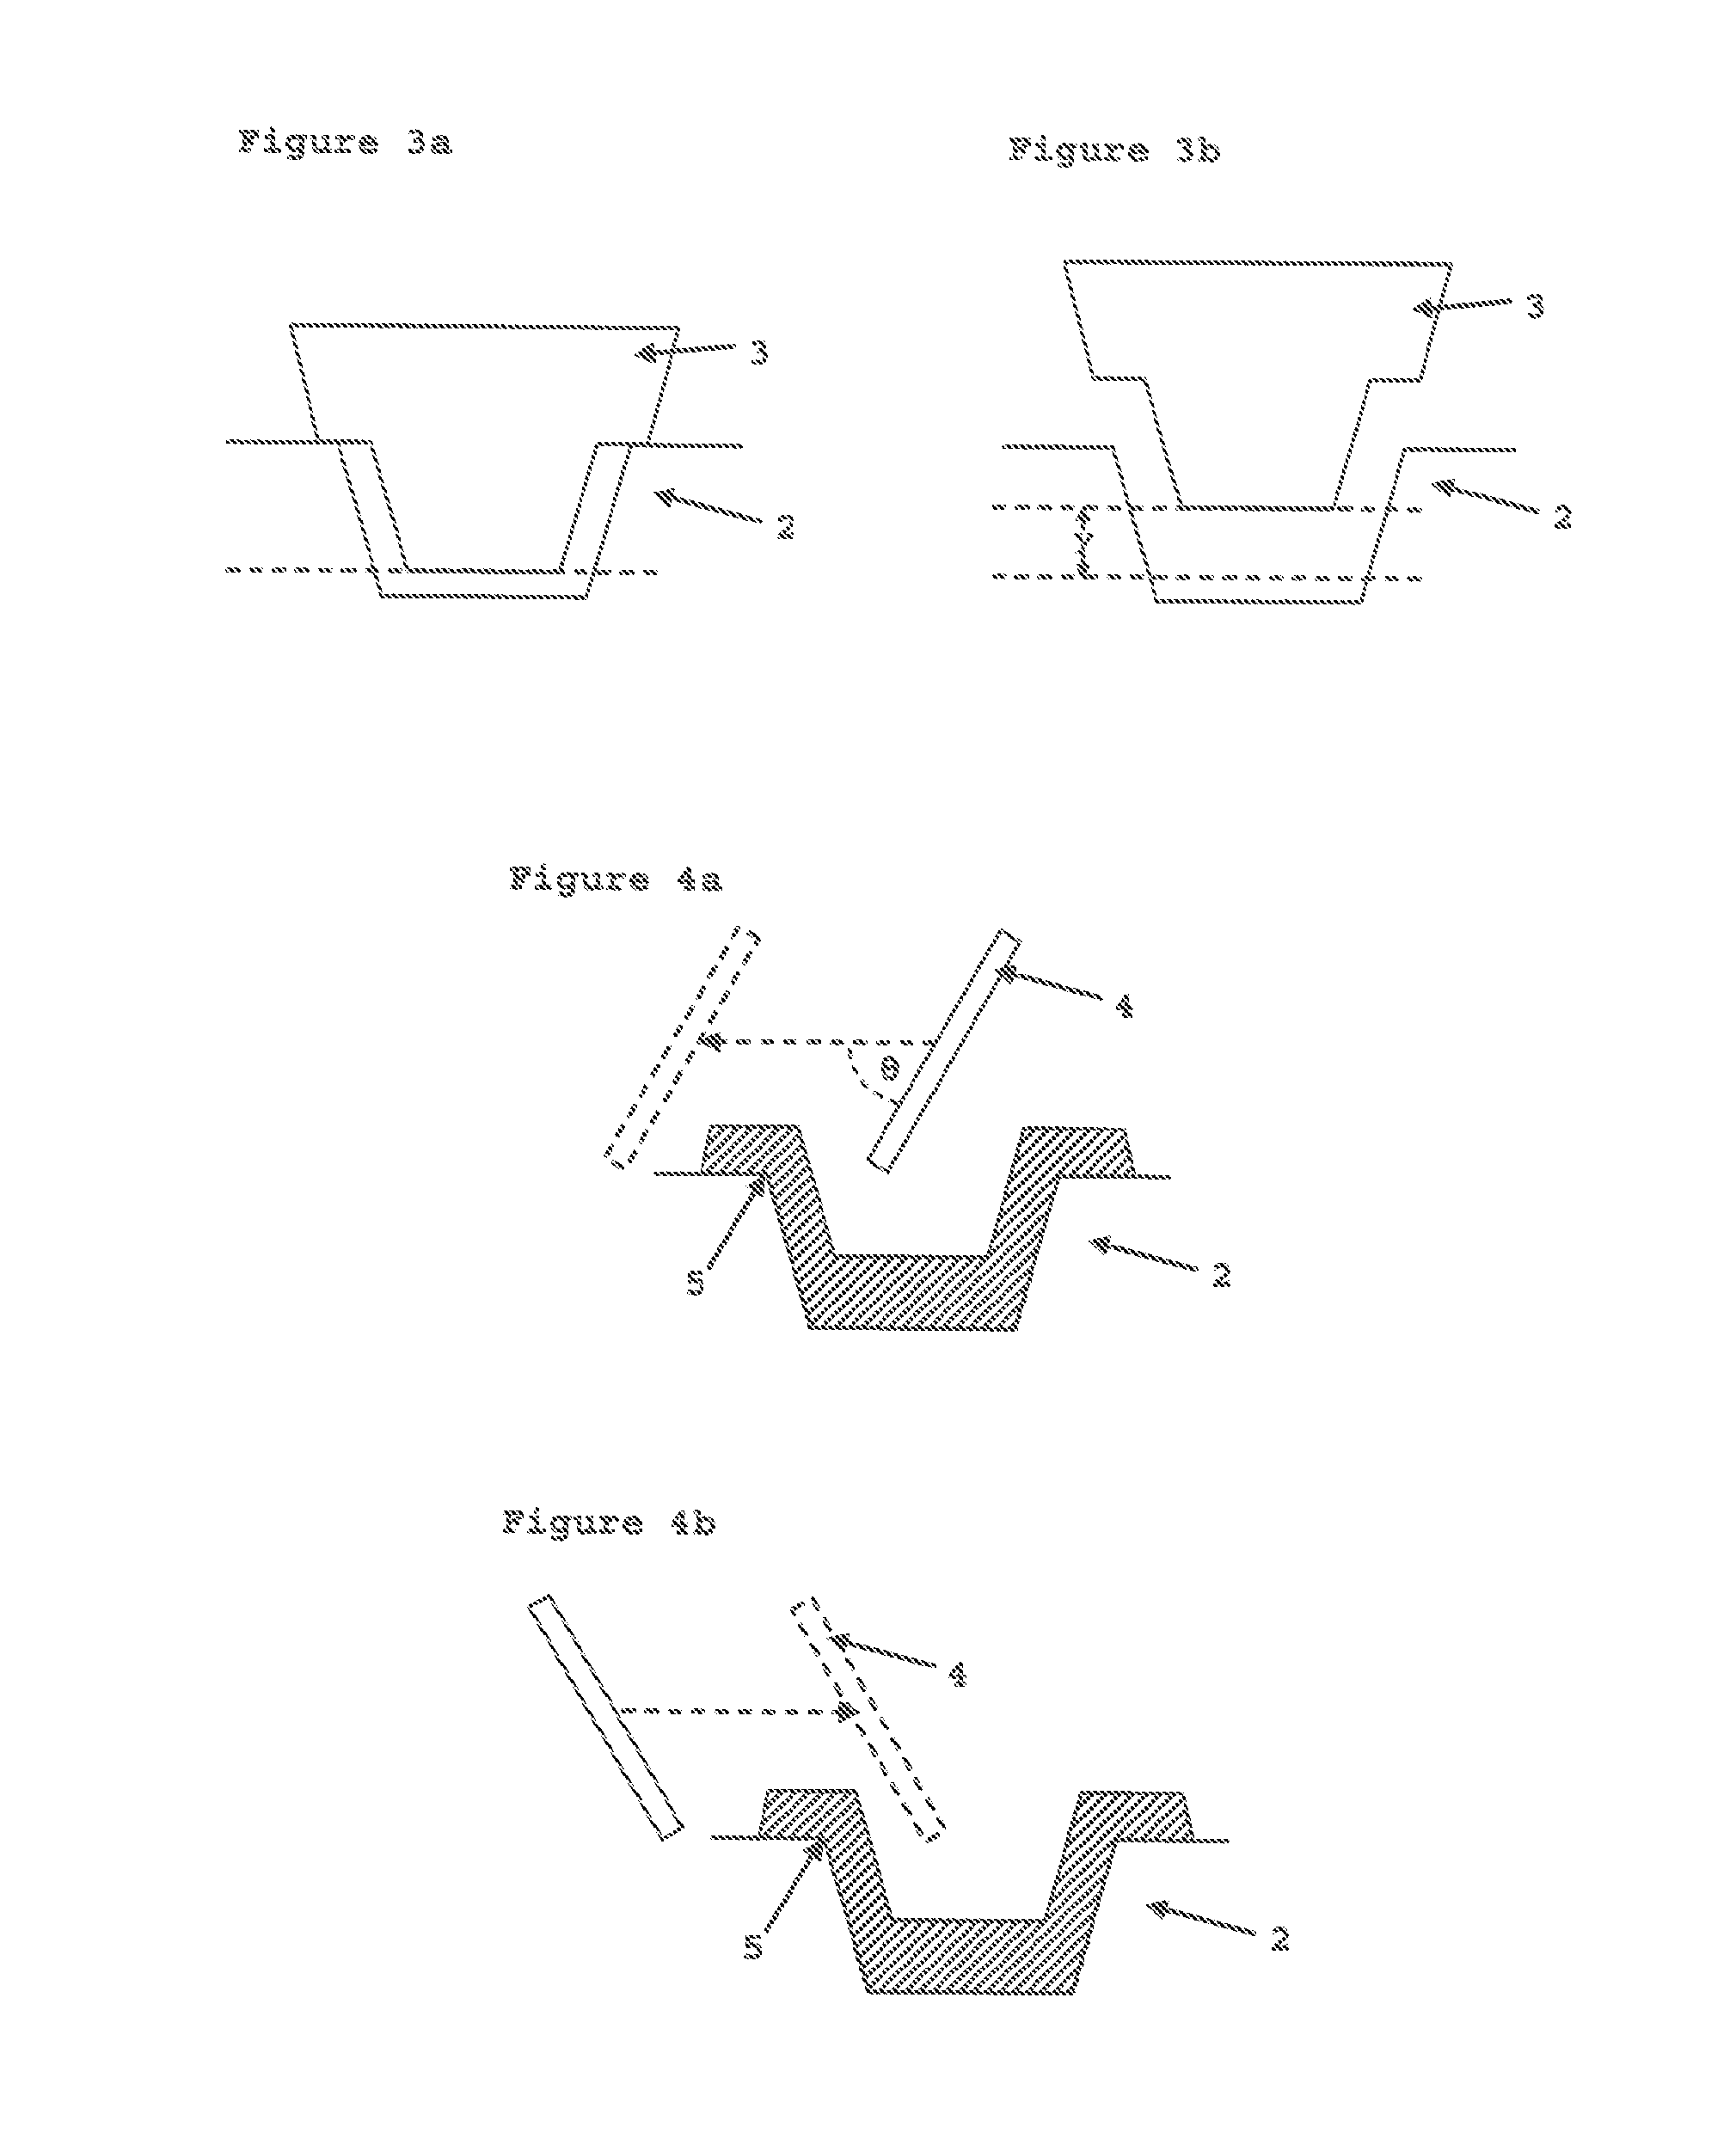 Method for manufacturing a confectionery shell